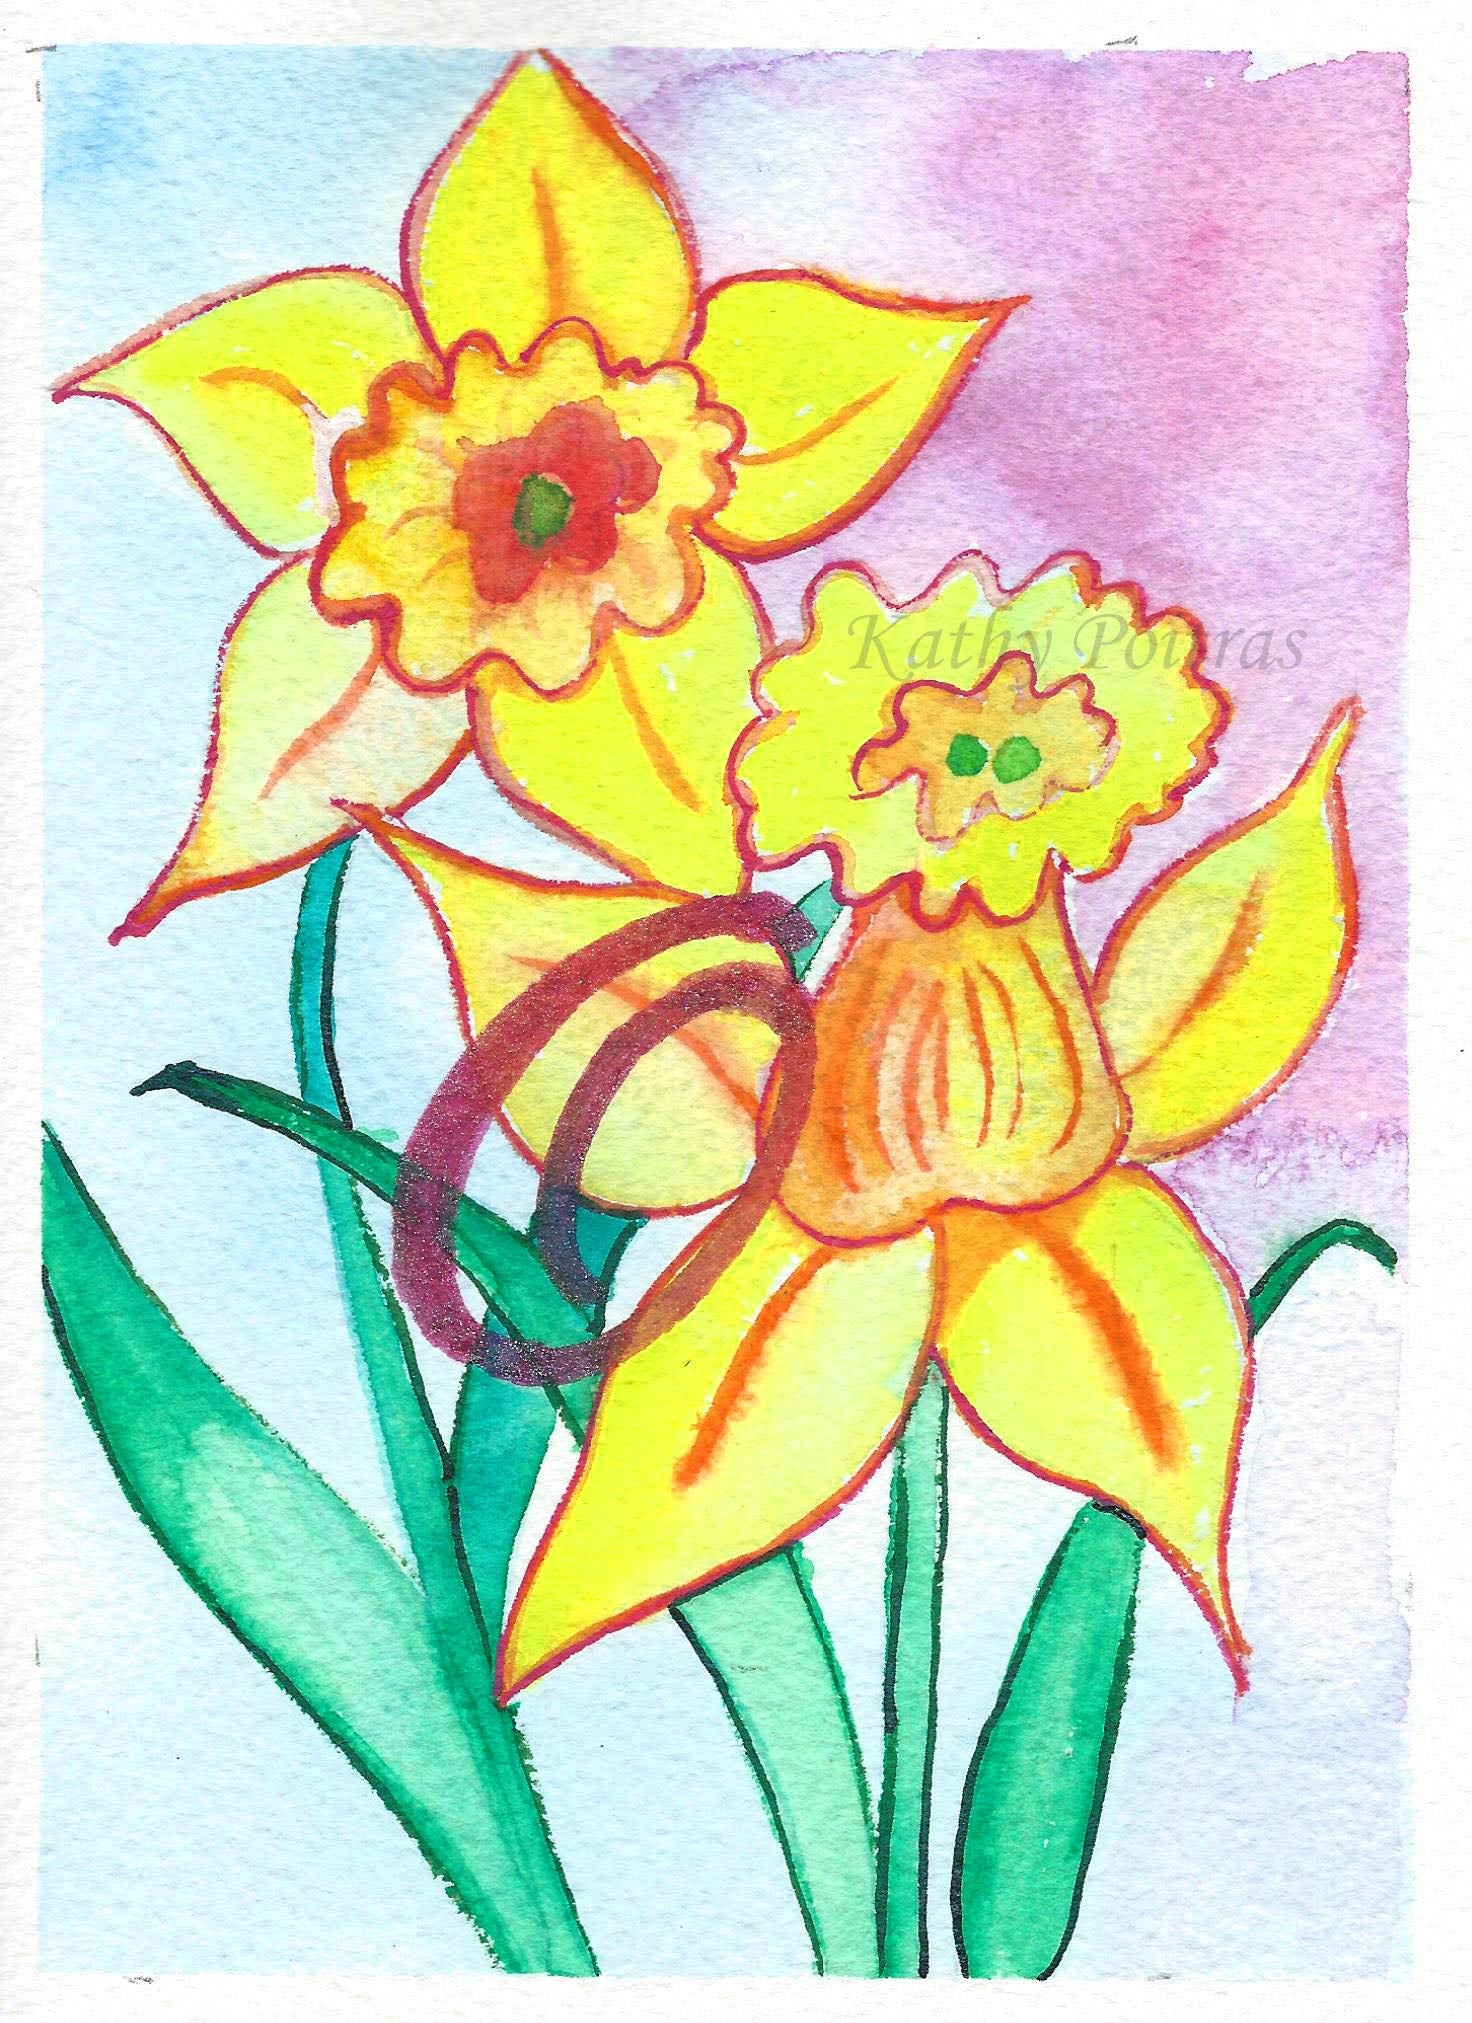 Original hand Painted one of a kind art card.  Daffodils inspired by the birth flower of the month for March. This greeting card is an individual painting, watercolor and ink painted on arches 100% cotton paper. personalized with a fancy letter O as part of the painting. by Canadian artist Kathy Poitras. 